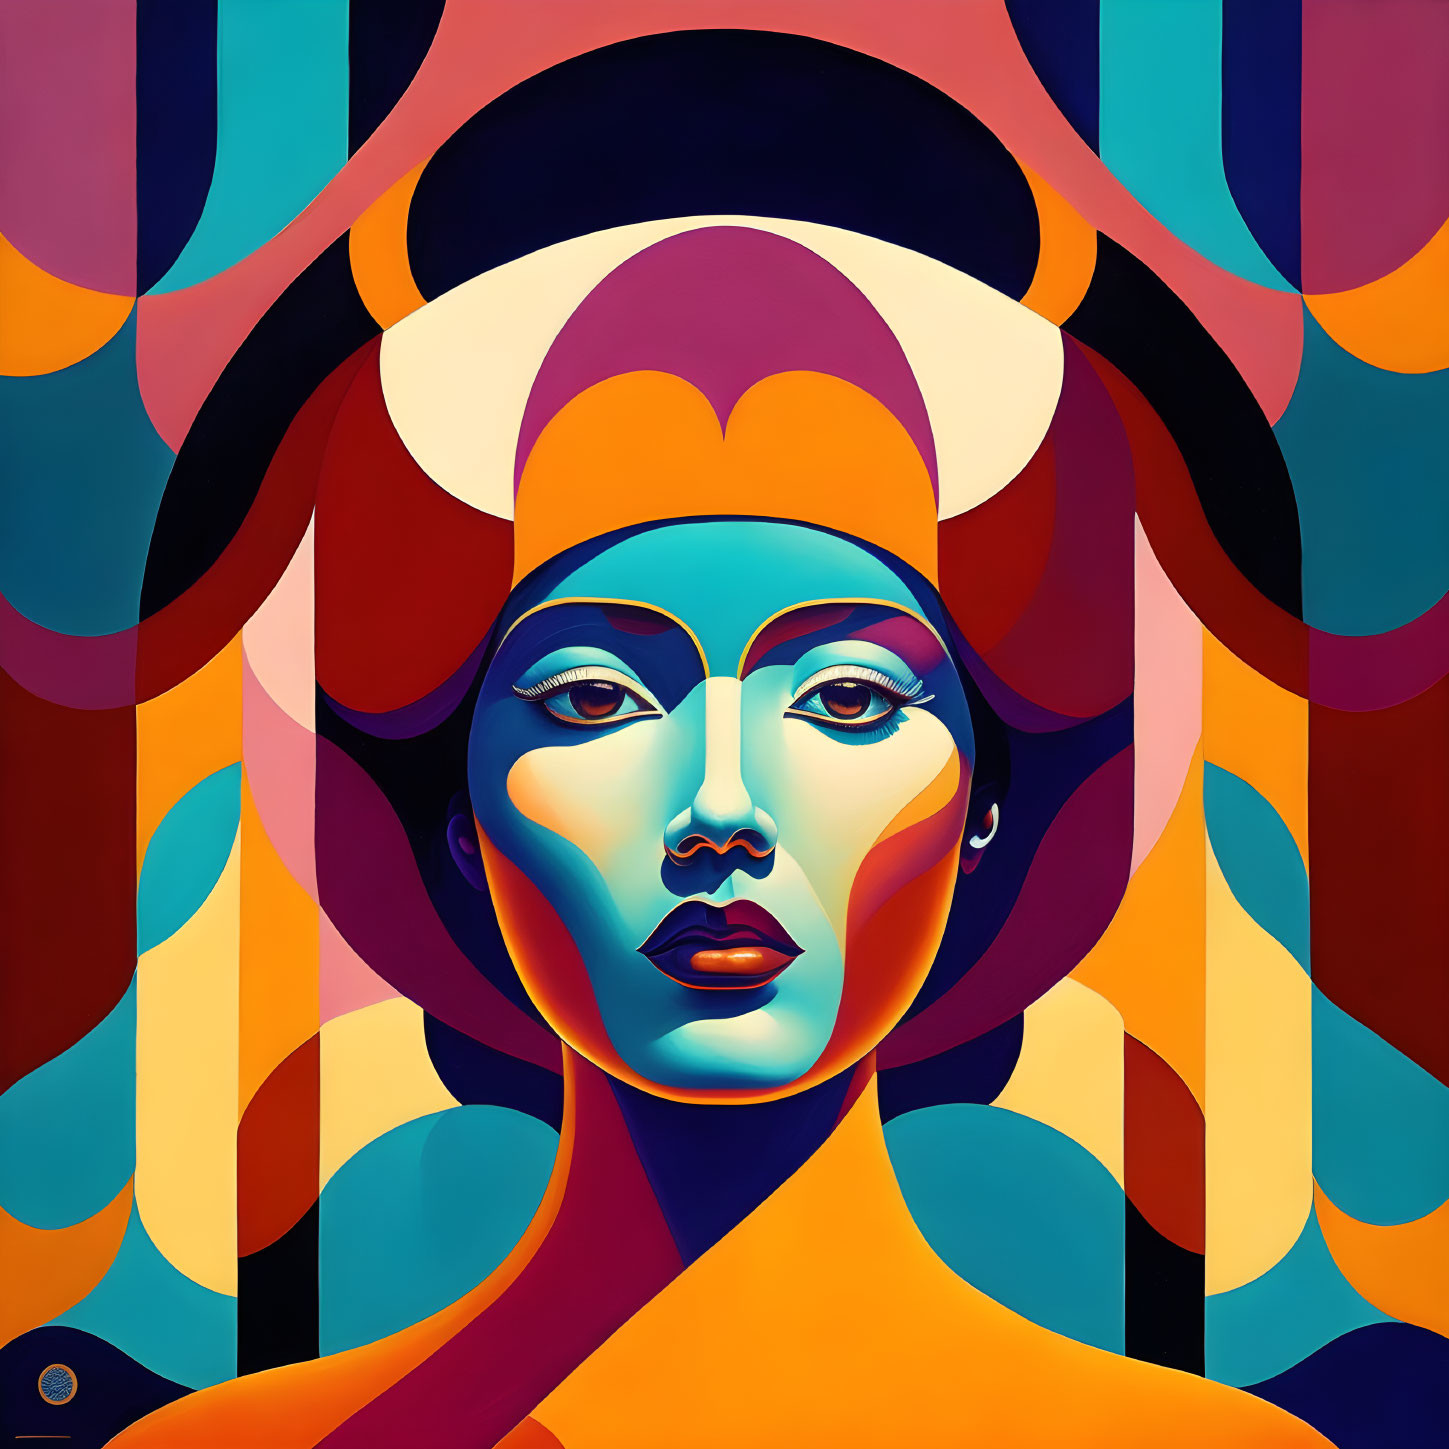 Vibrant digital portrait of a woman with abstract blue, orange, and red patterns